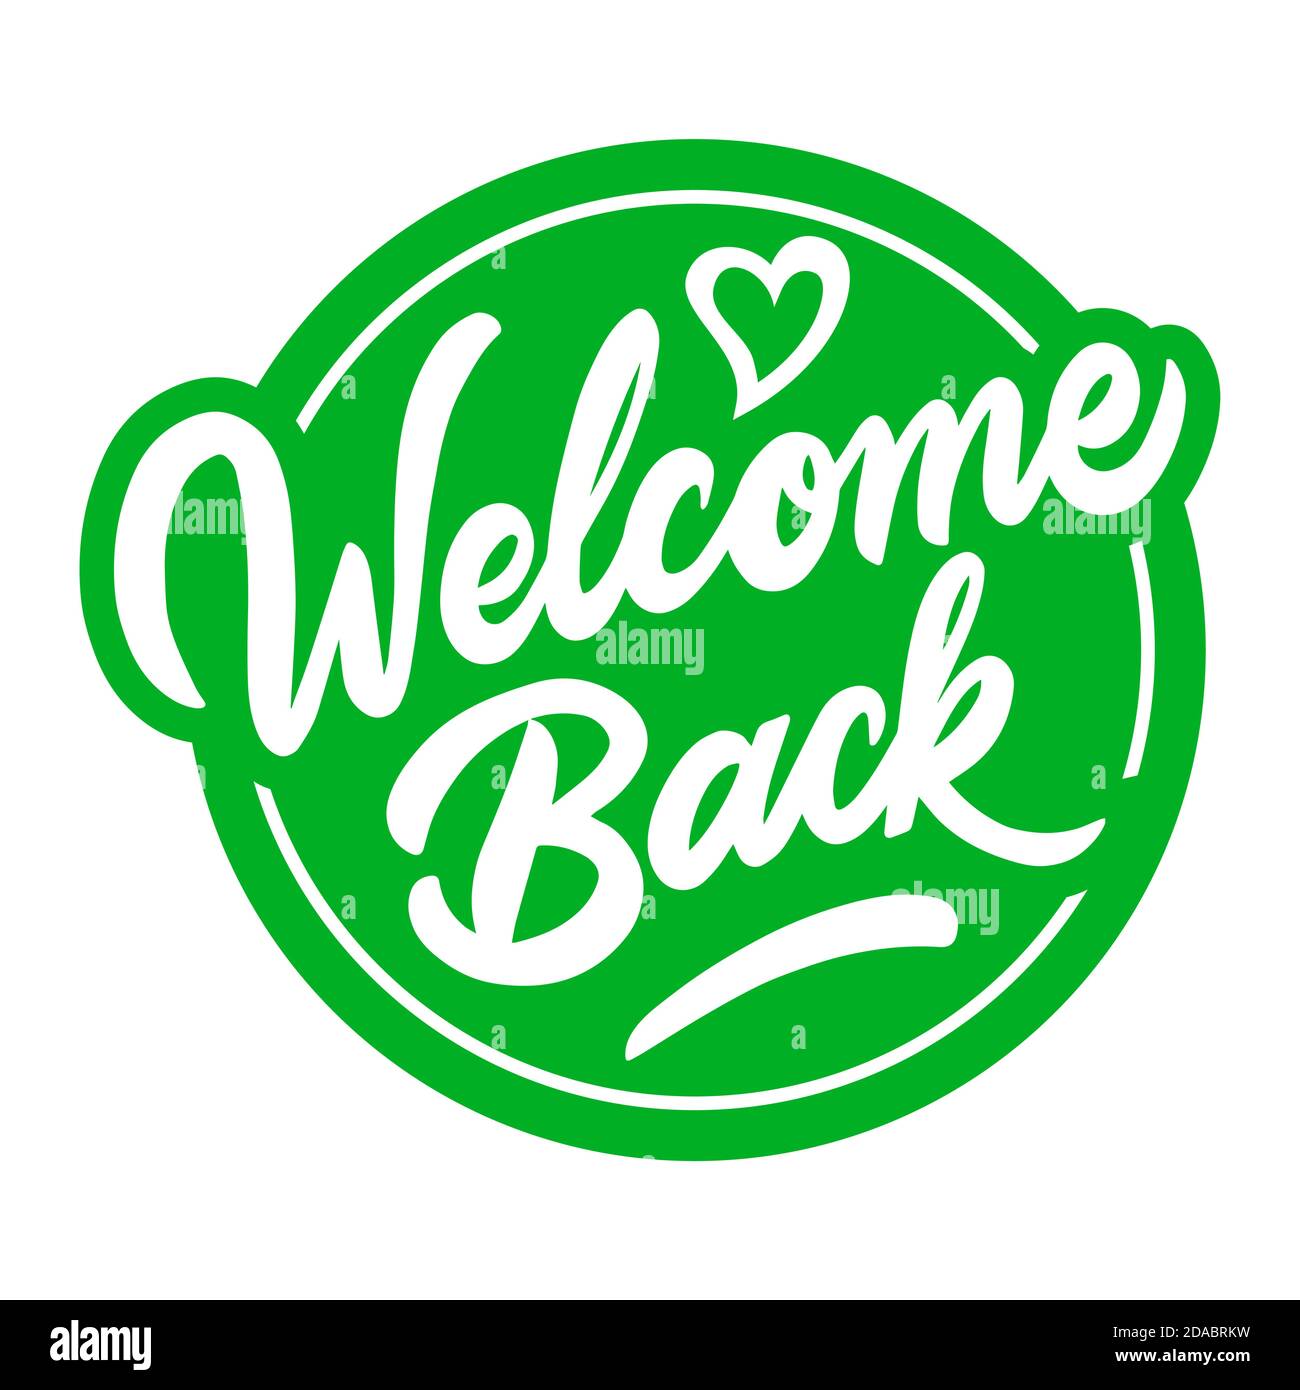 Fun sign on the front door - welcome back! We are open after quarantine over. Vector Stock Vector